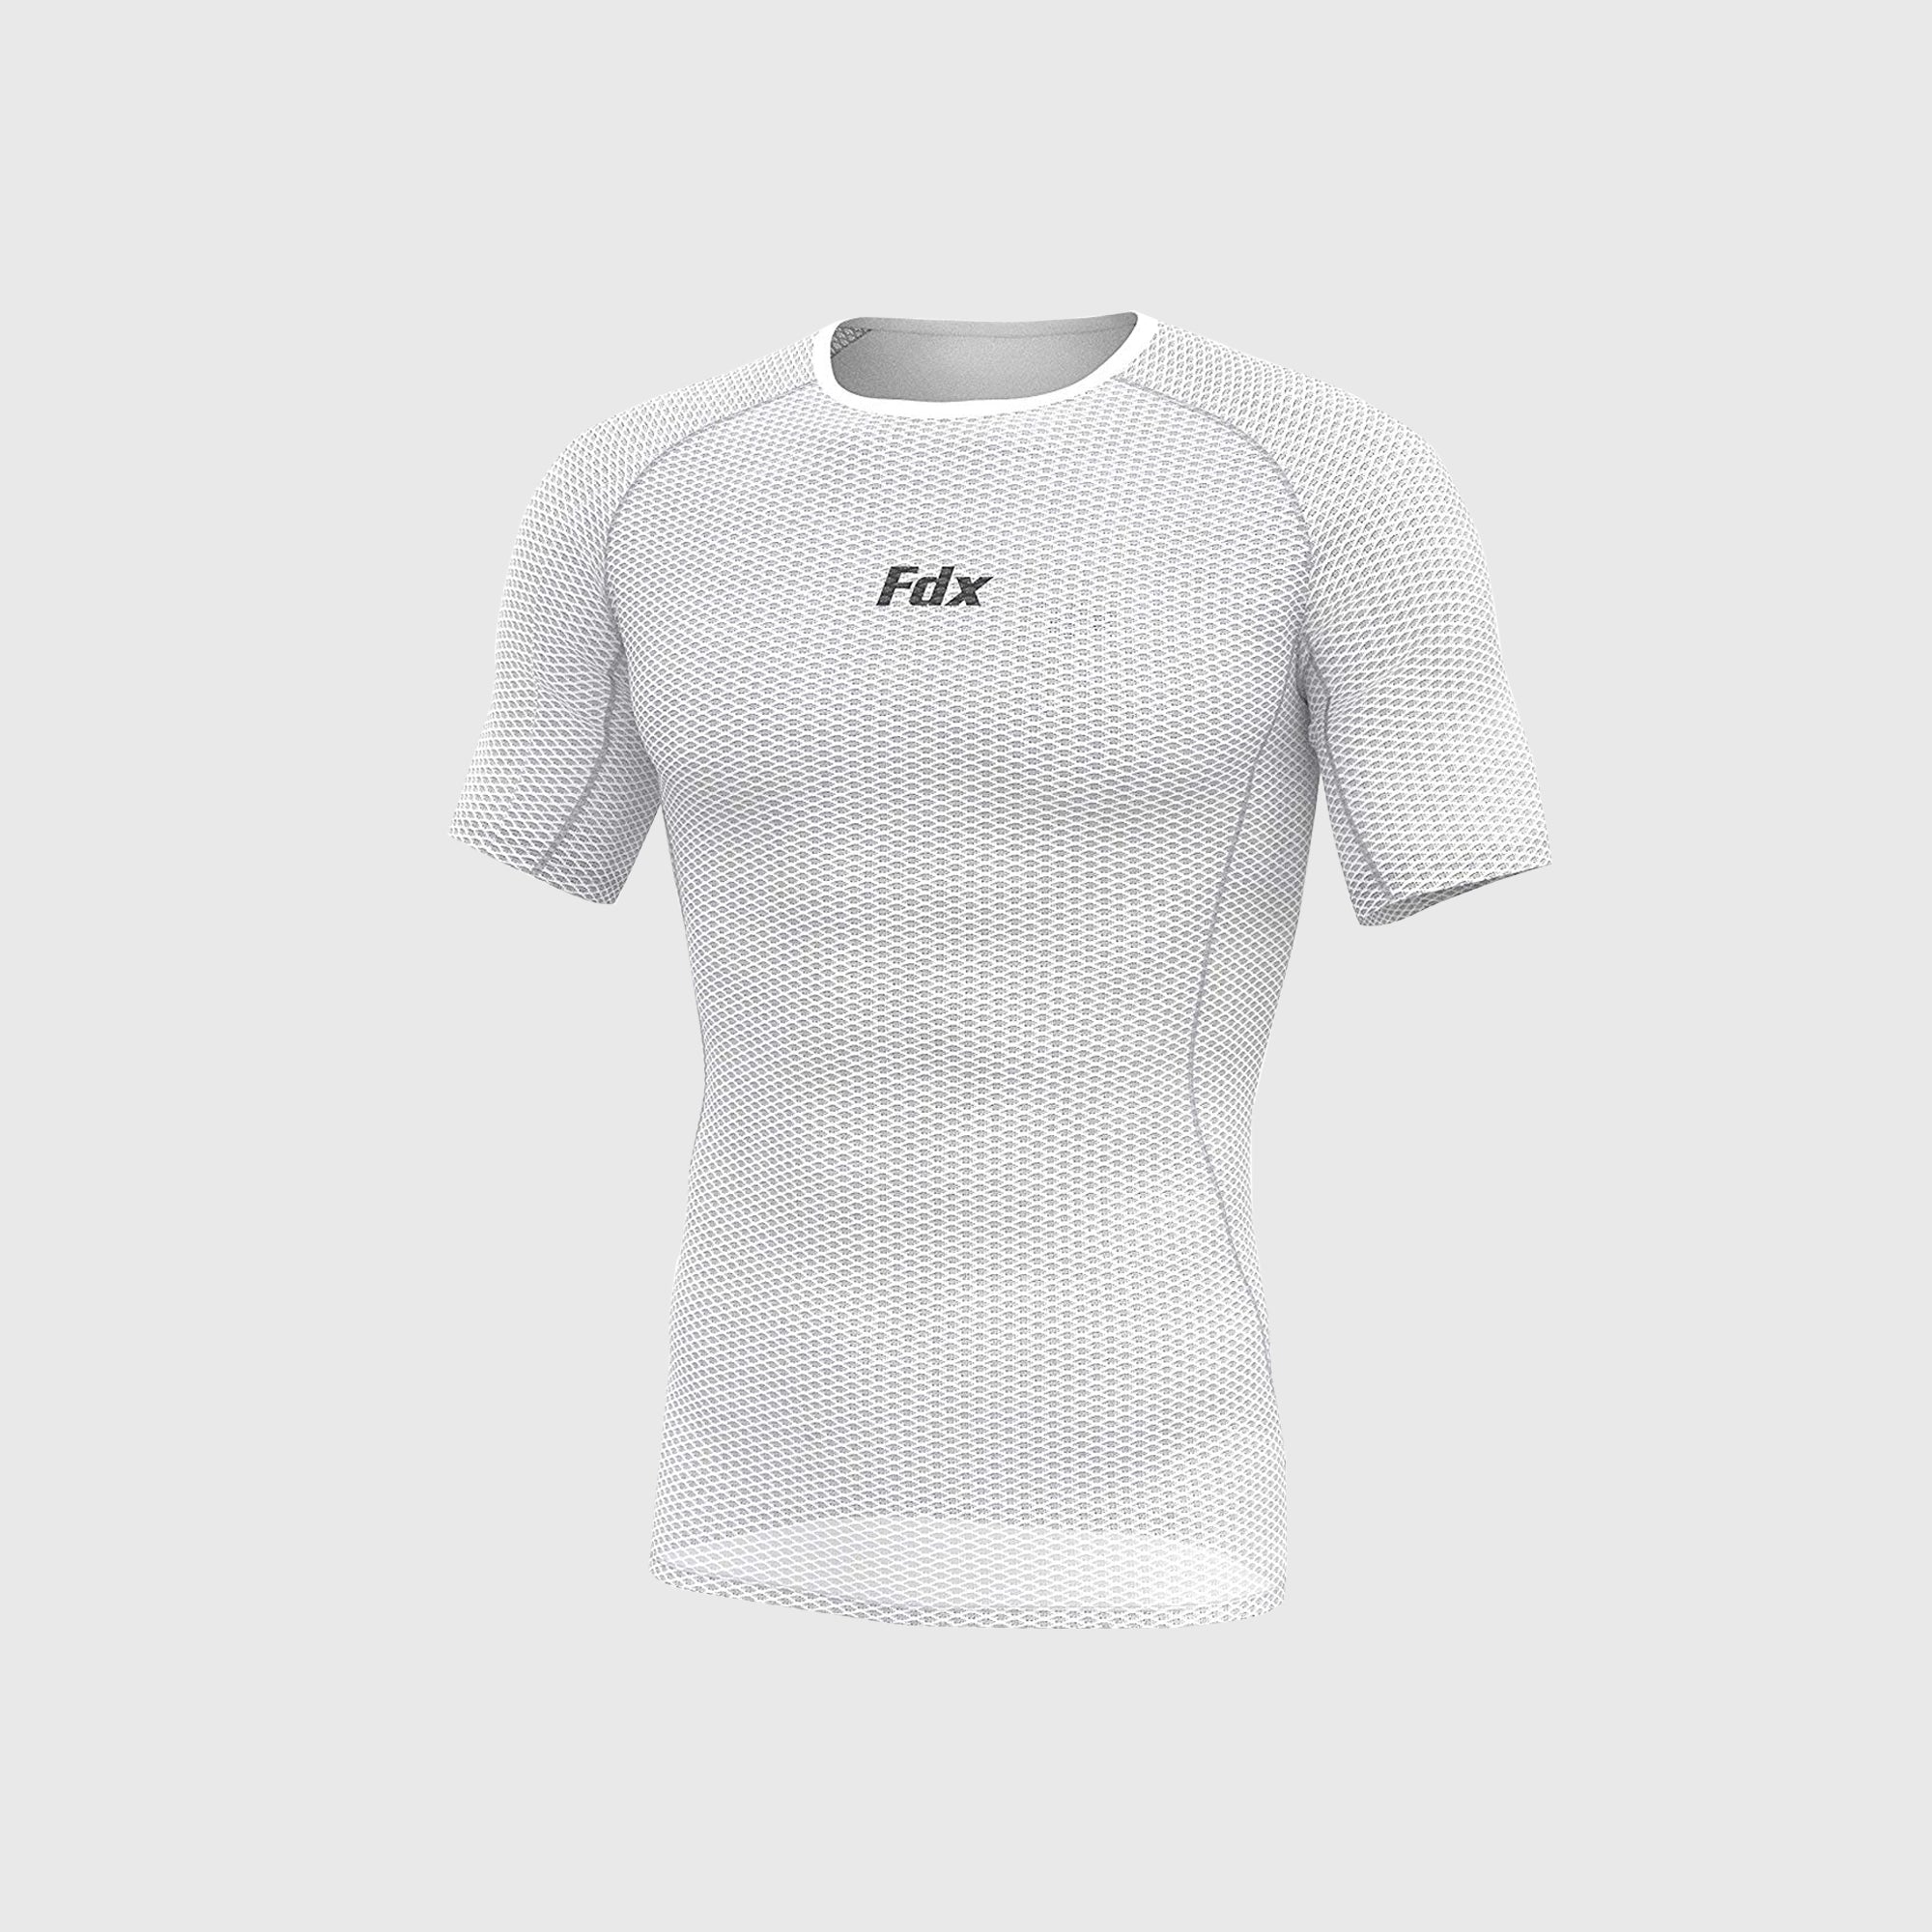 Fdx Mens White Short Sleeve Mesh Compression Top Running Gym Workout Wear Rash Guard Stretchable Breathable - Aeroform